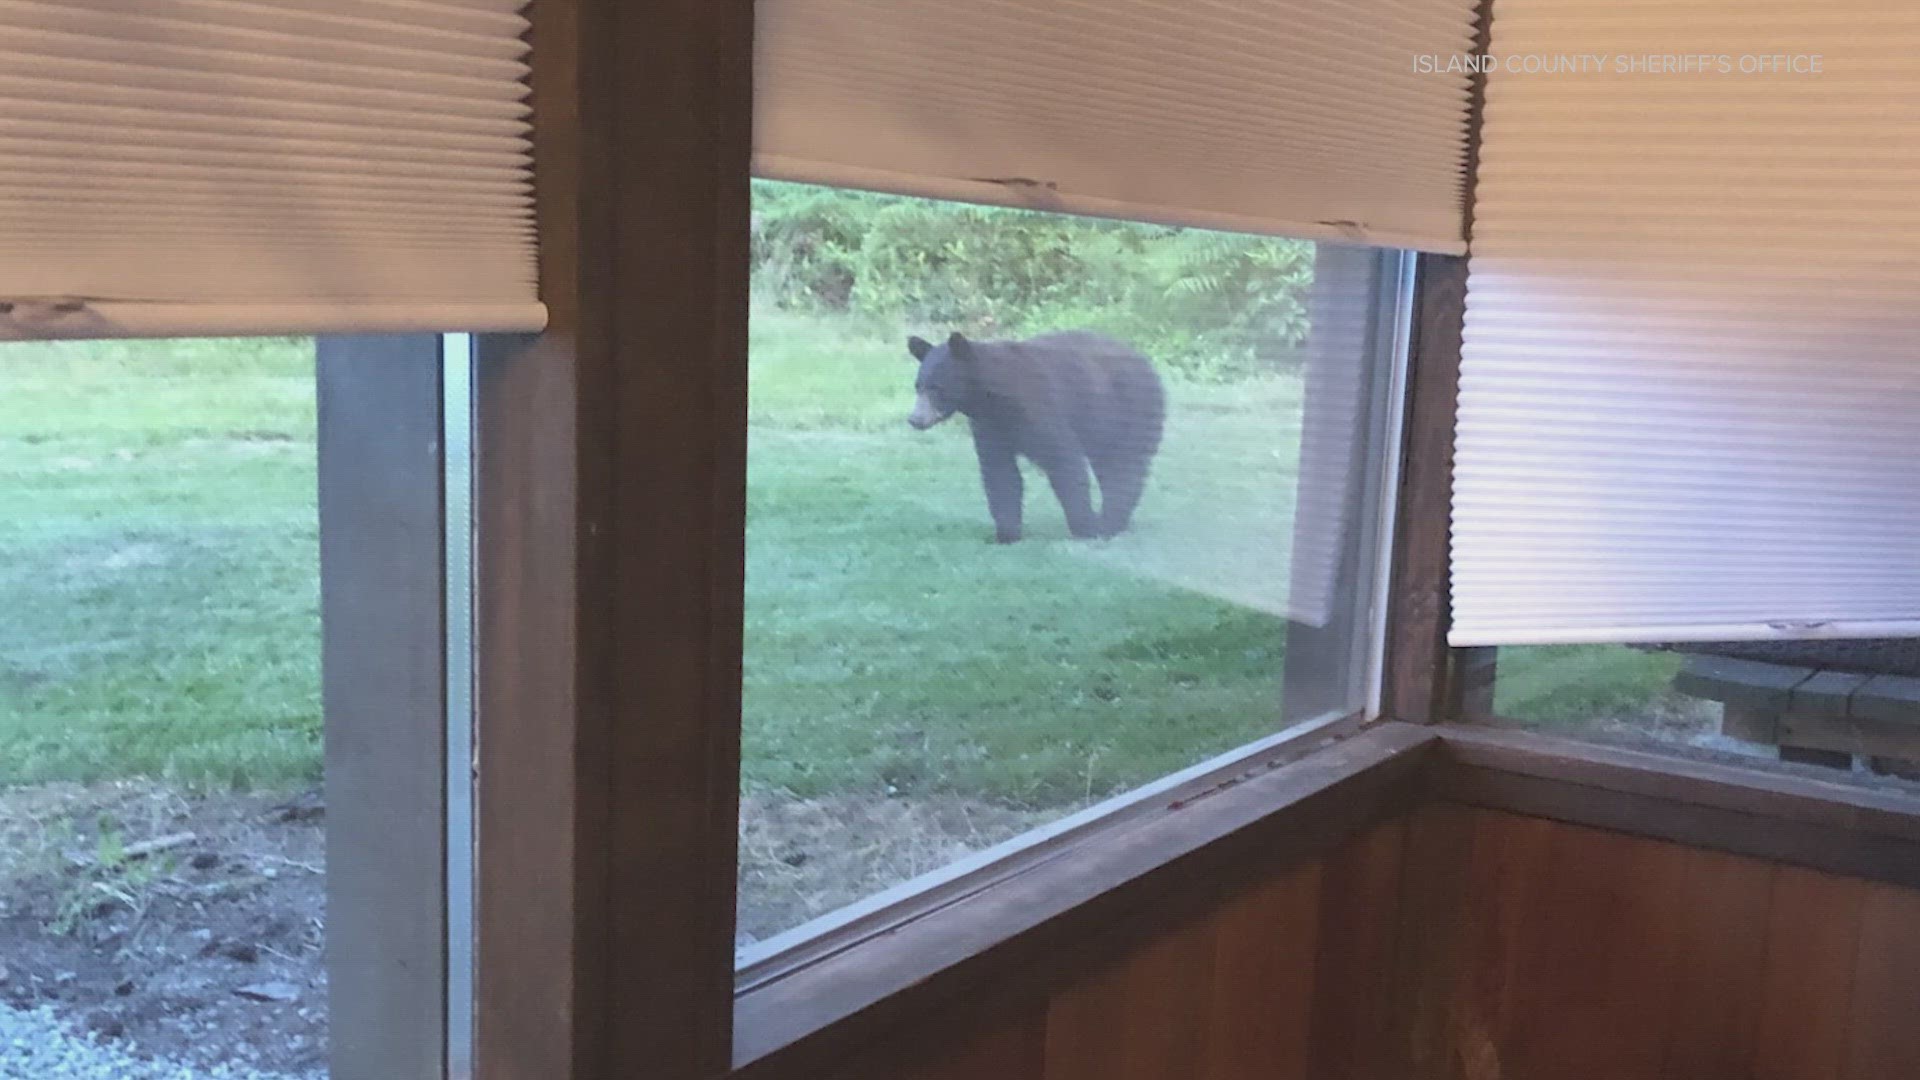 Although bears aren't known to frequent the island, there have been more sightings as of late, the sheriff's office said.